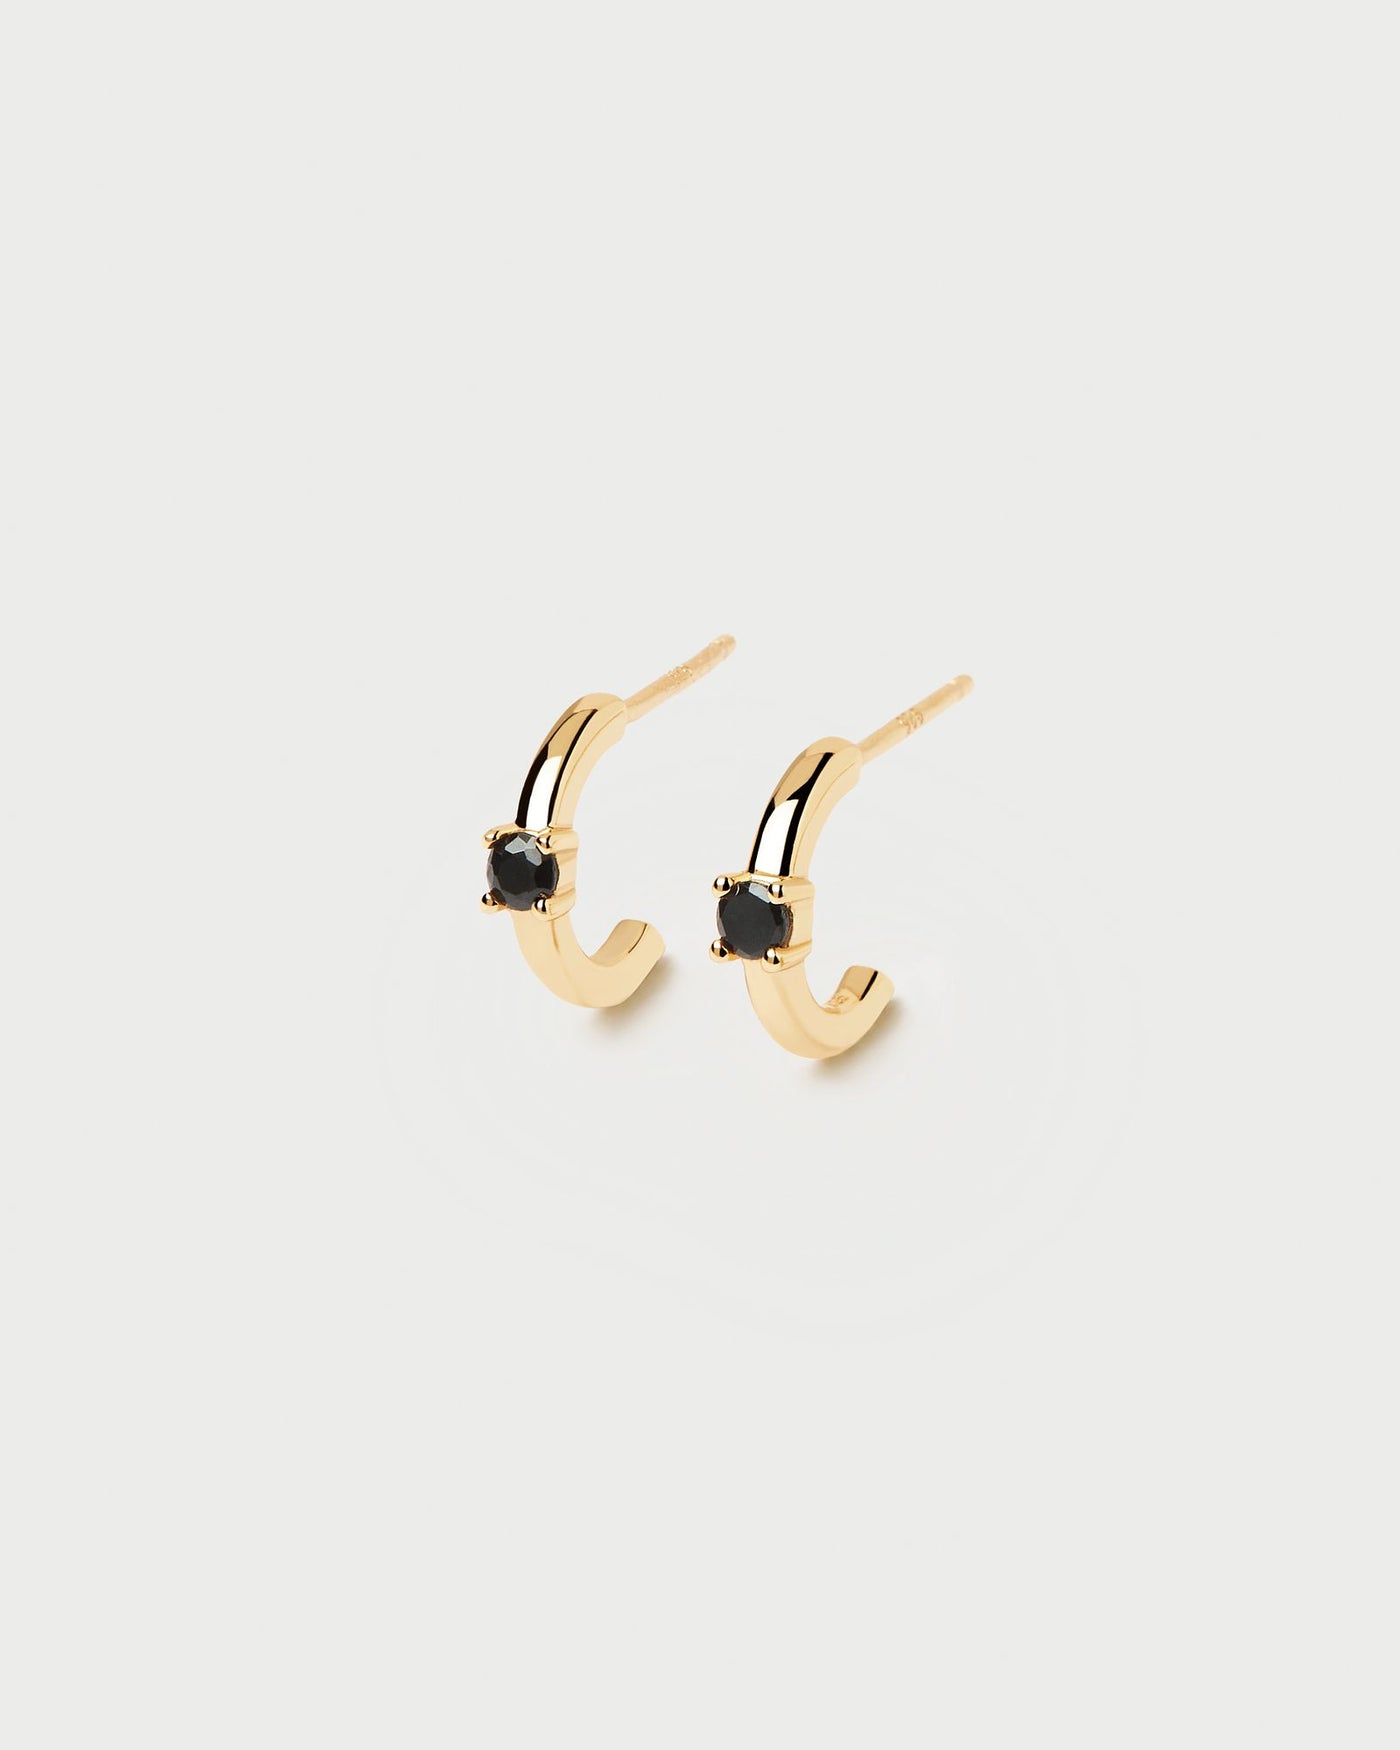 2024 Selection | Black Solitary Earrings. 18k gold plated silver c hoops with a round-cut black zirconia stone. Get the latest arrival from PDPAOLA. Place your order safely and get this Best Seller. Free Shipping.